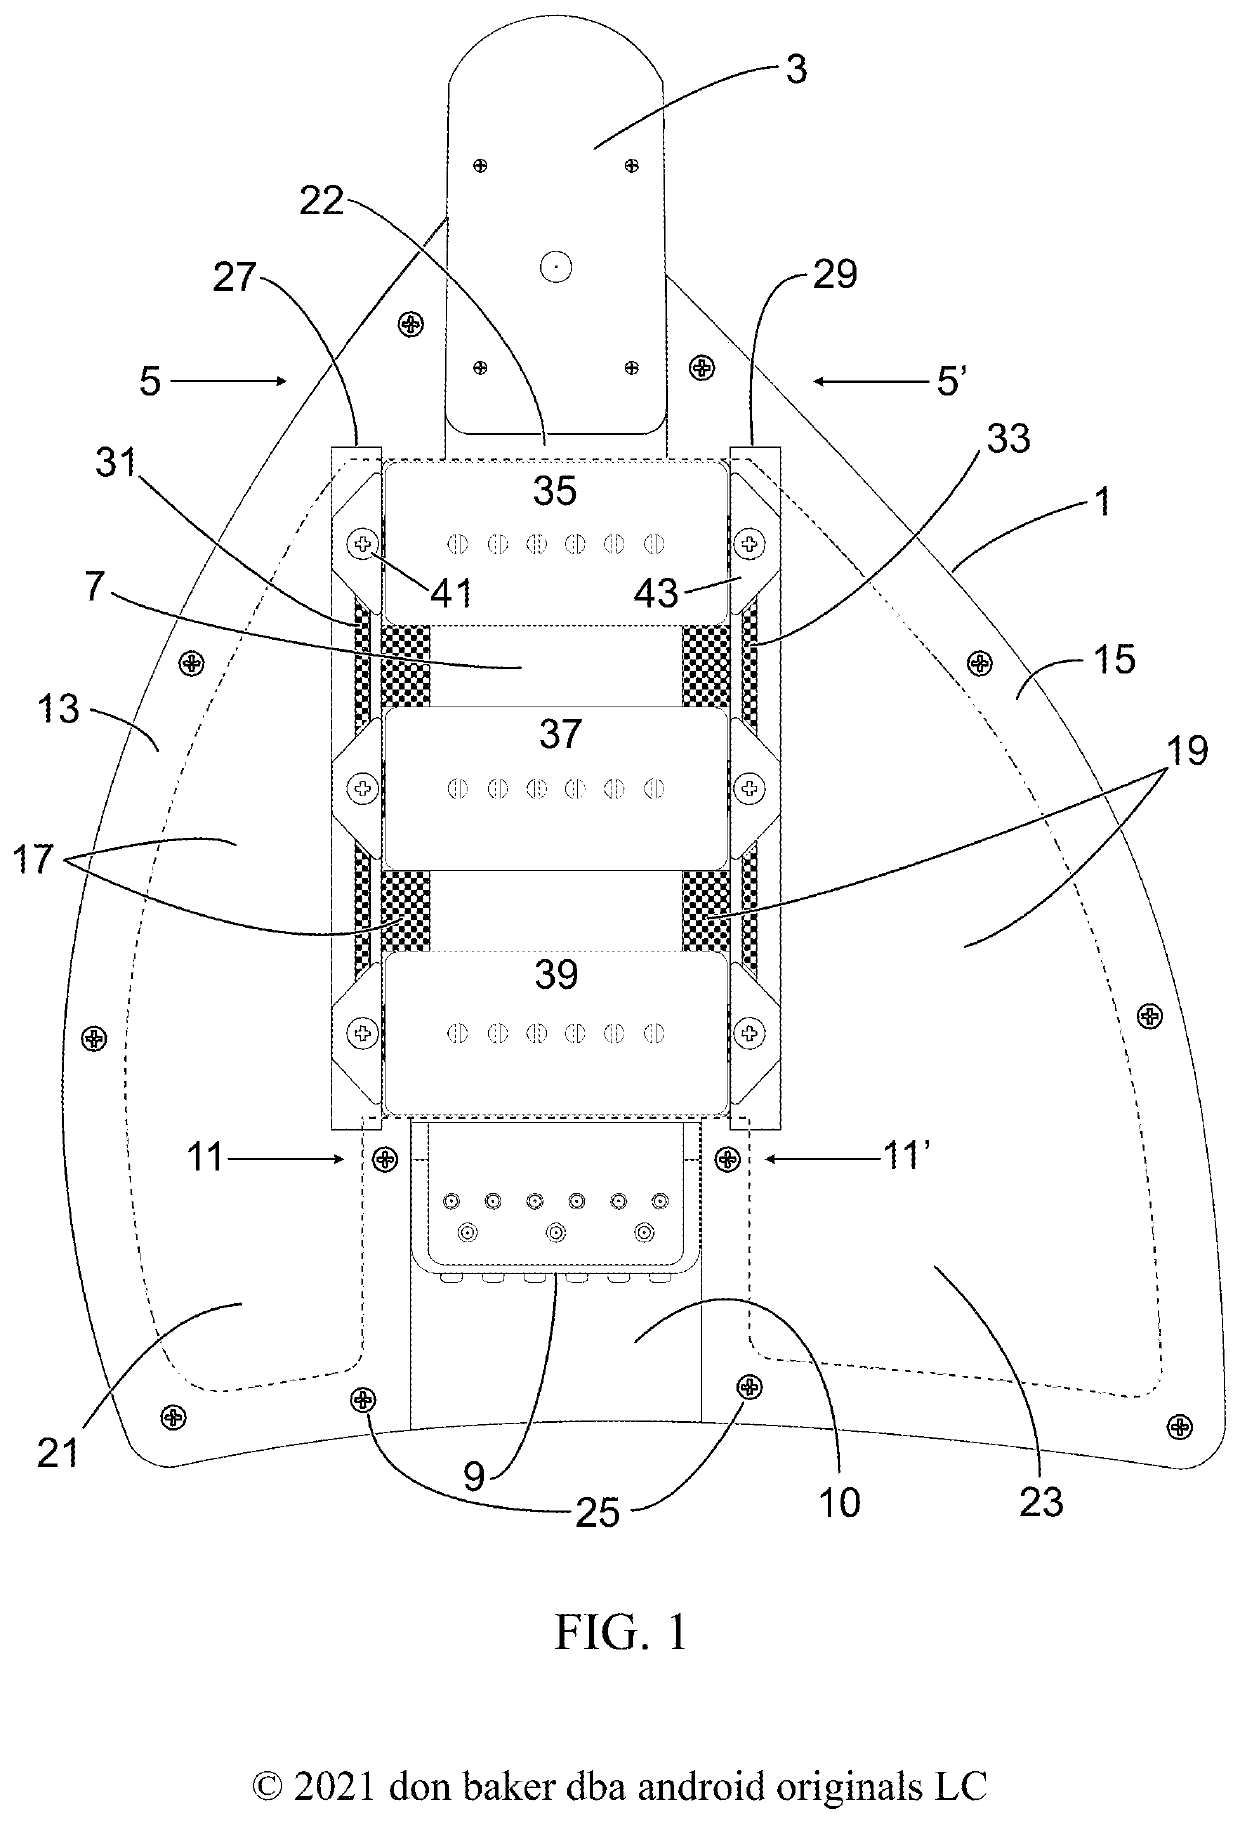 Electric Stringed Instrument Using Movable Pickups and Humbucking Circuits